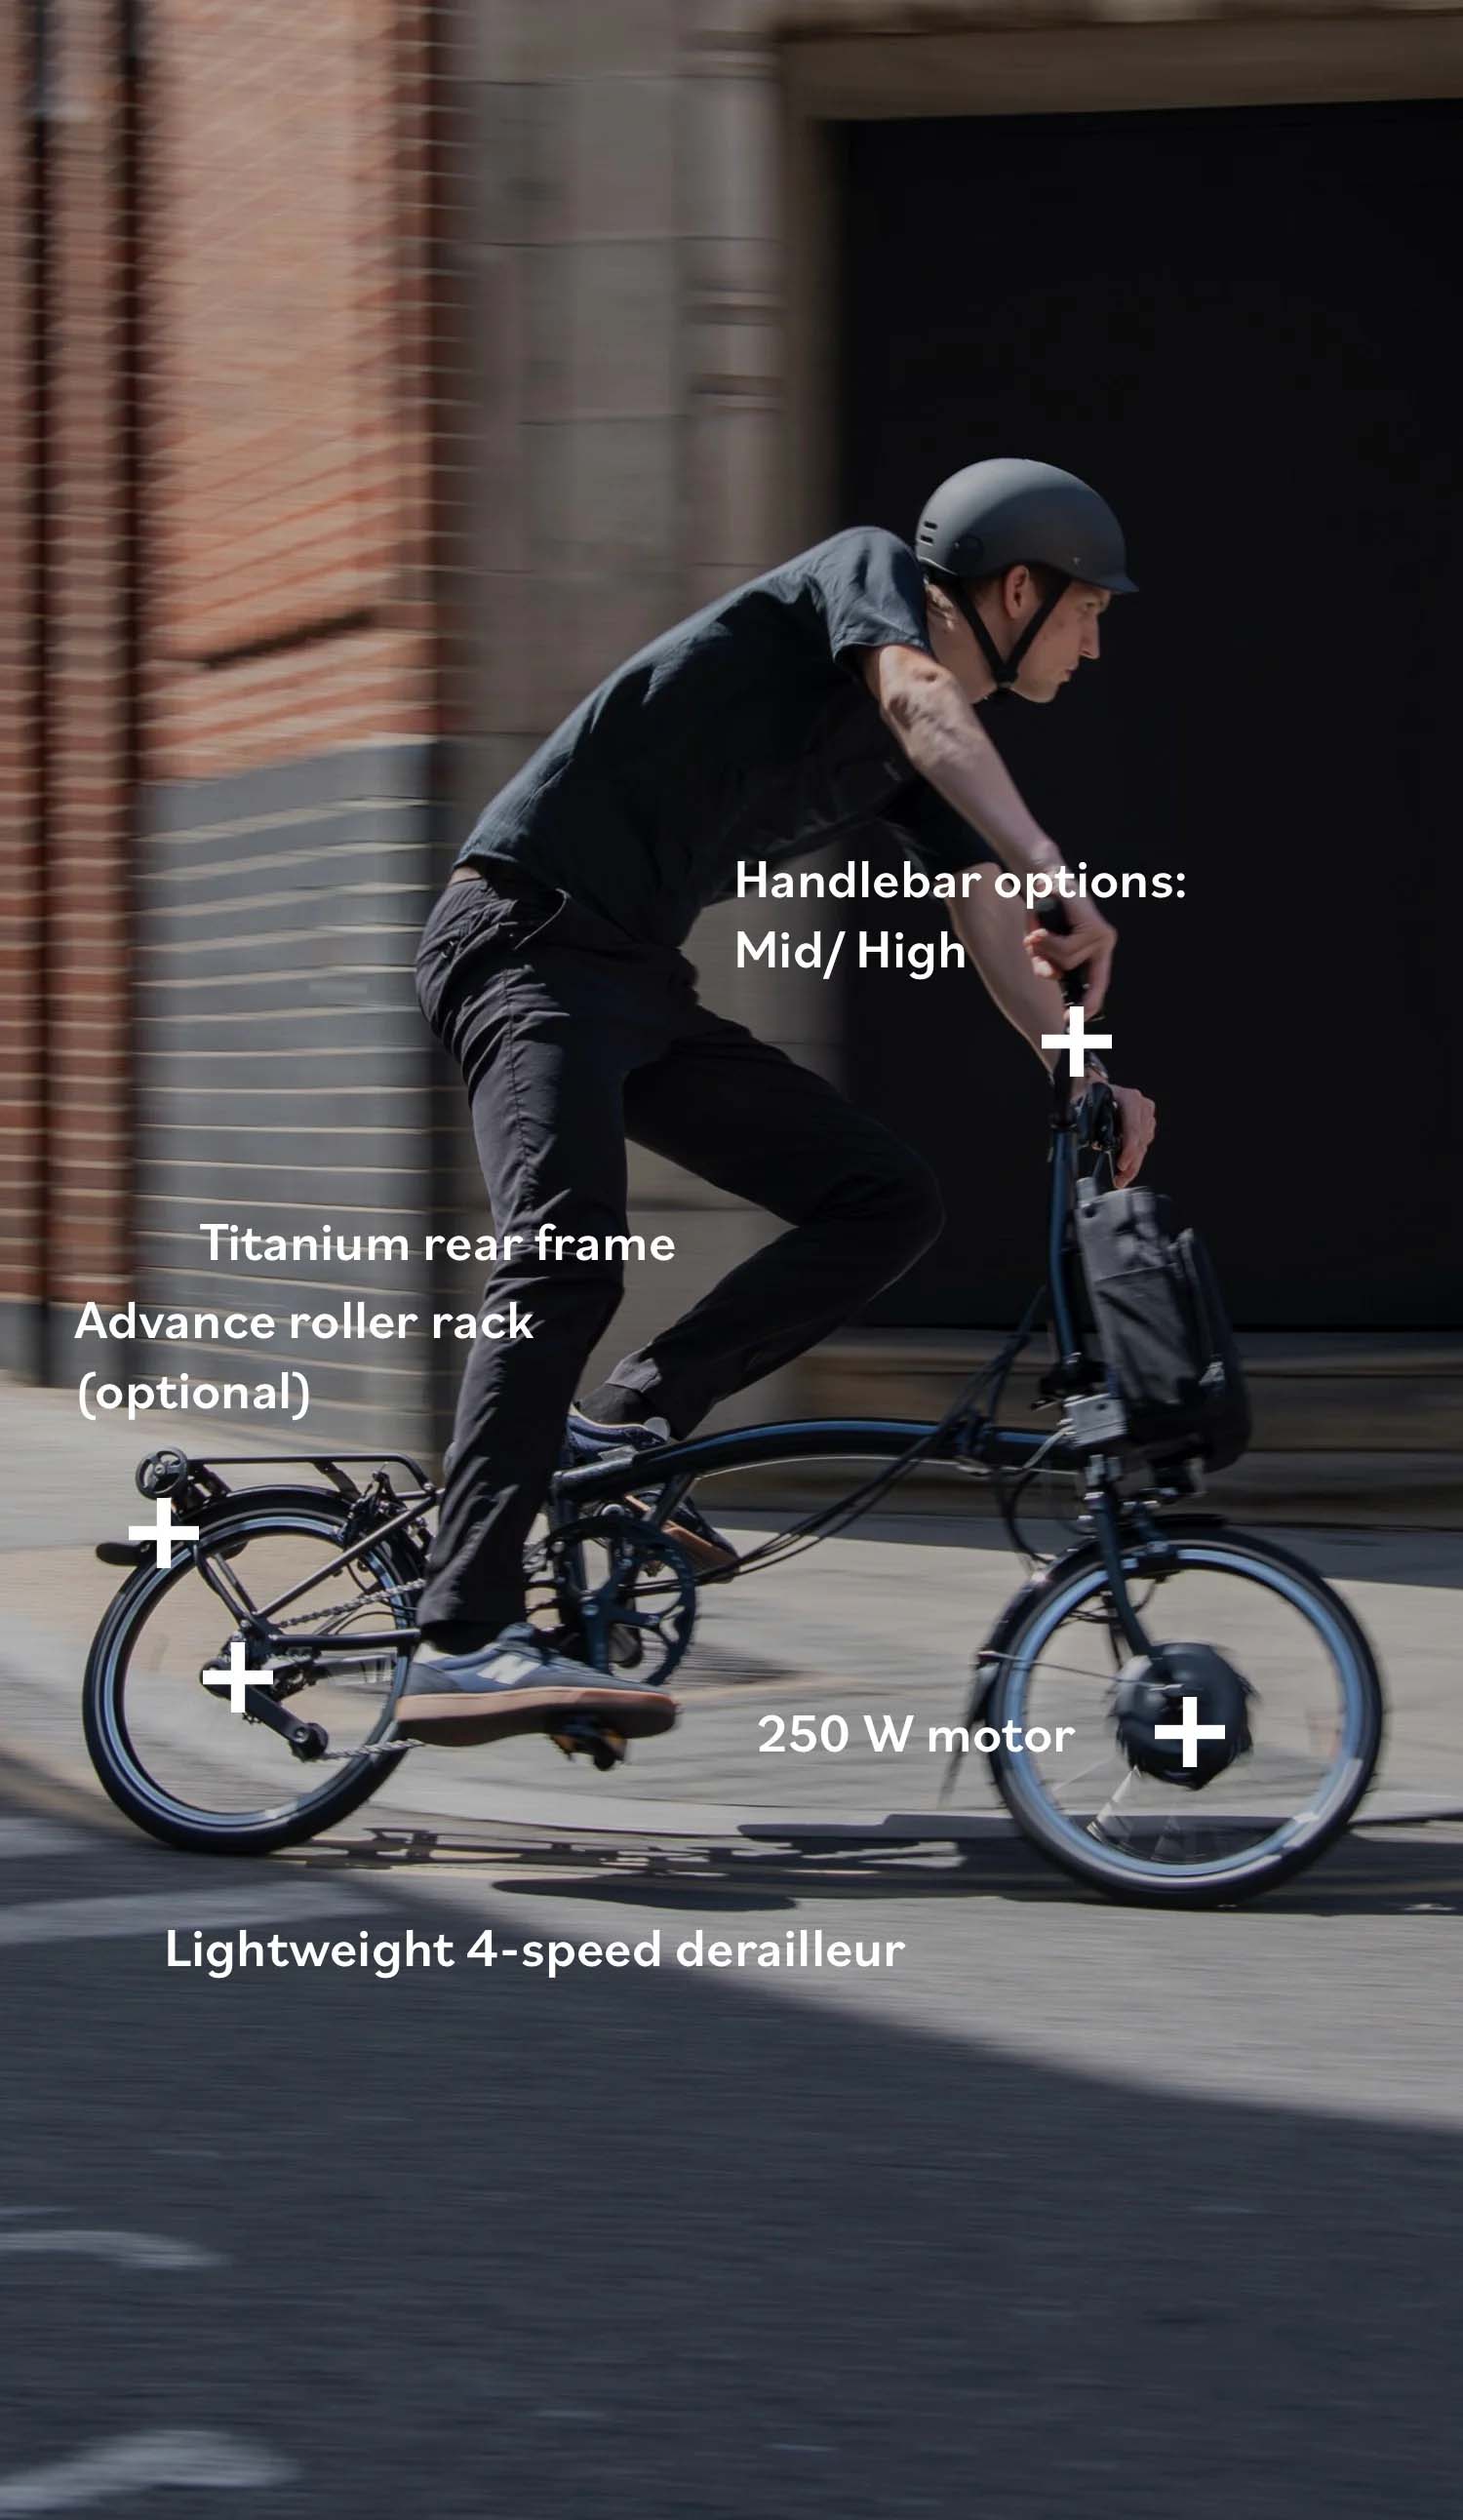 Bike image with text